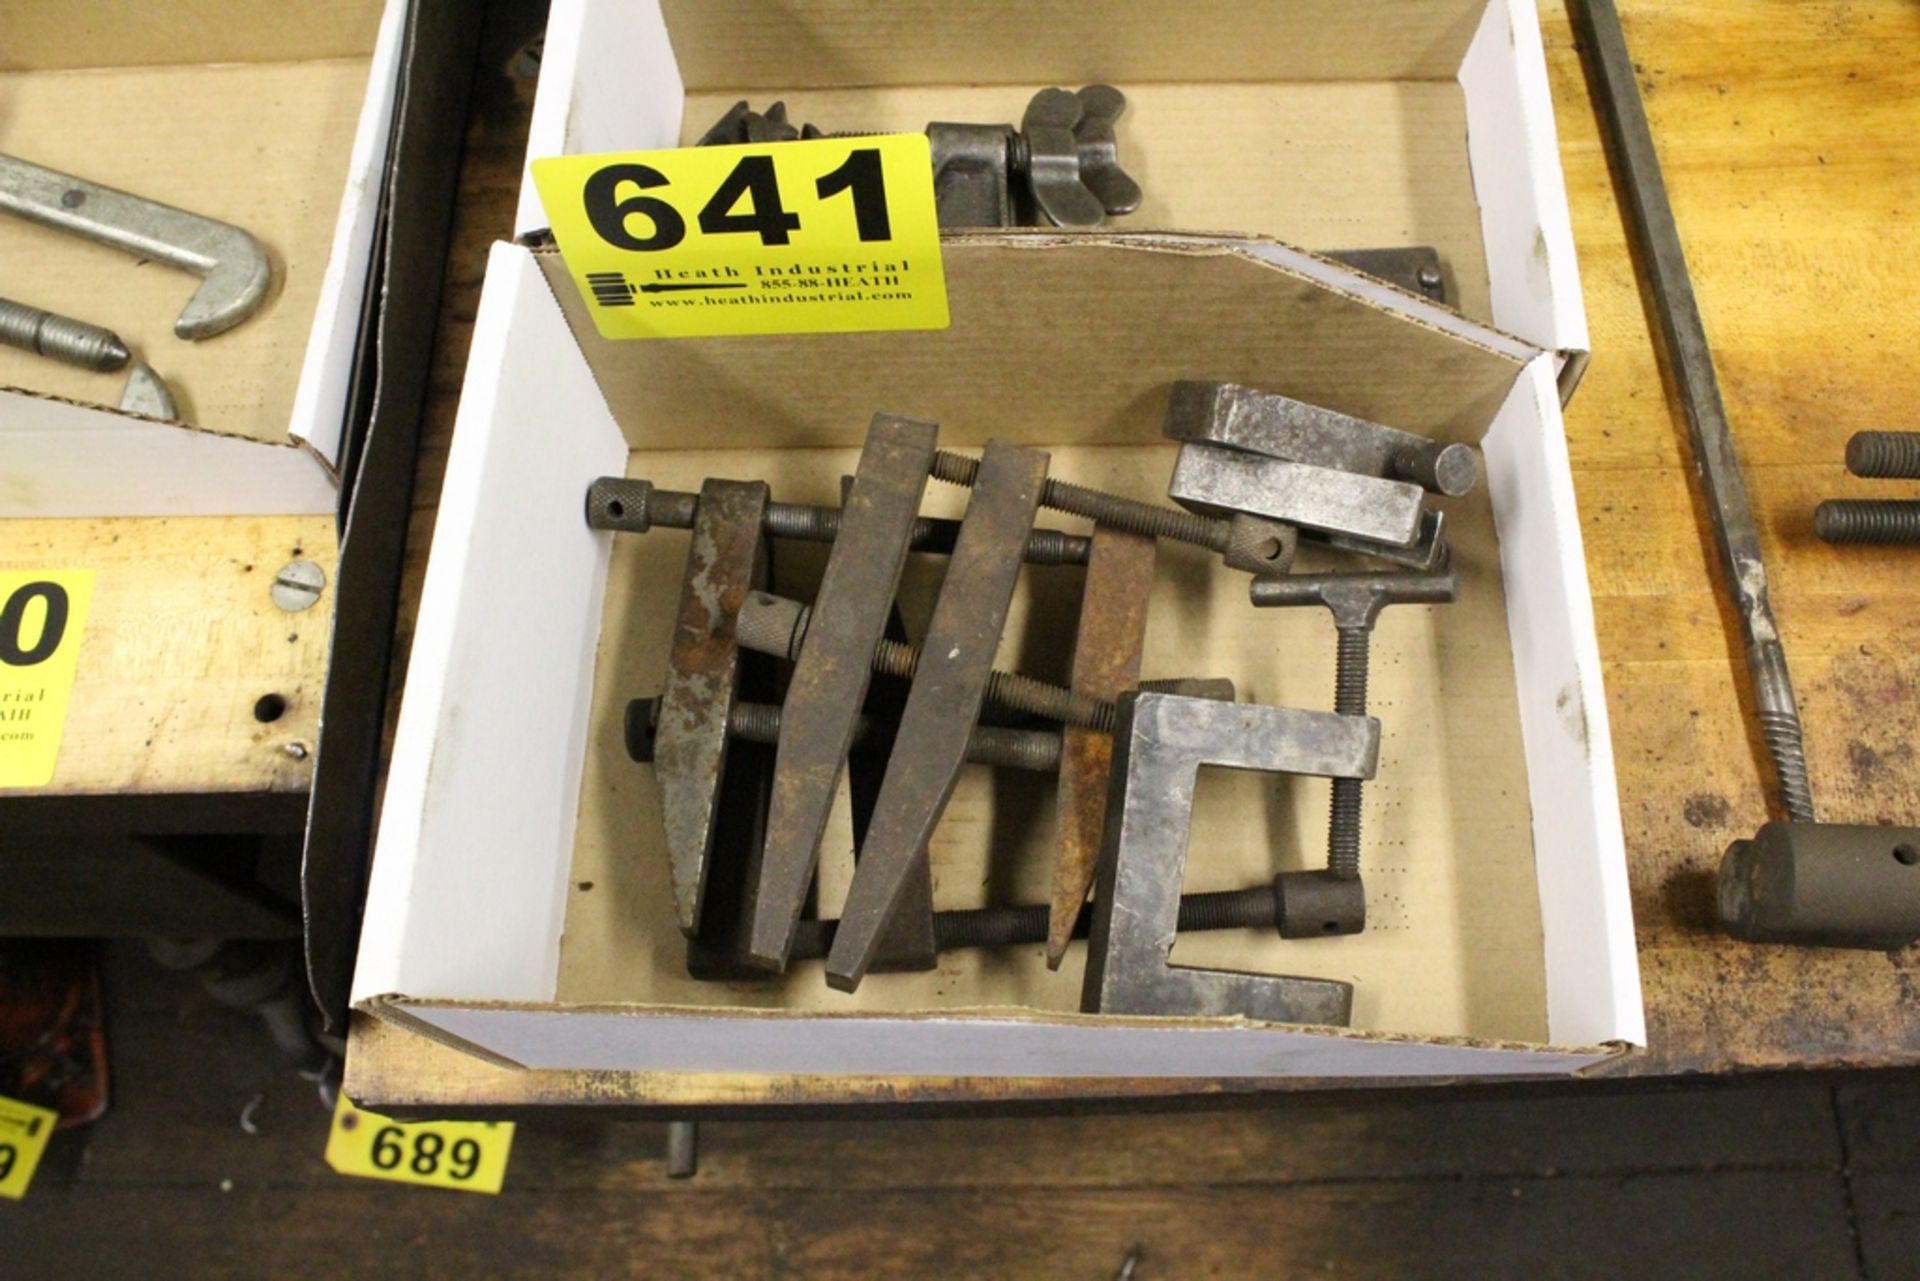 ASSORTED PRECISION CLAMPS IN BOX